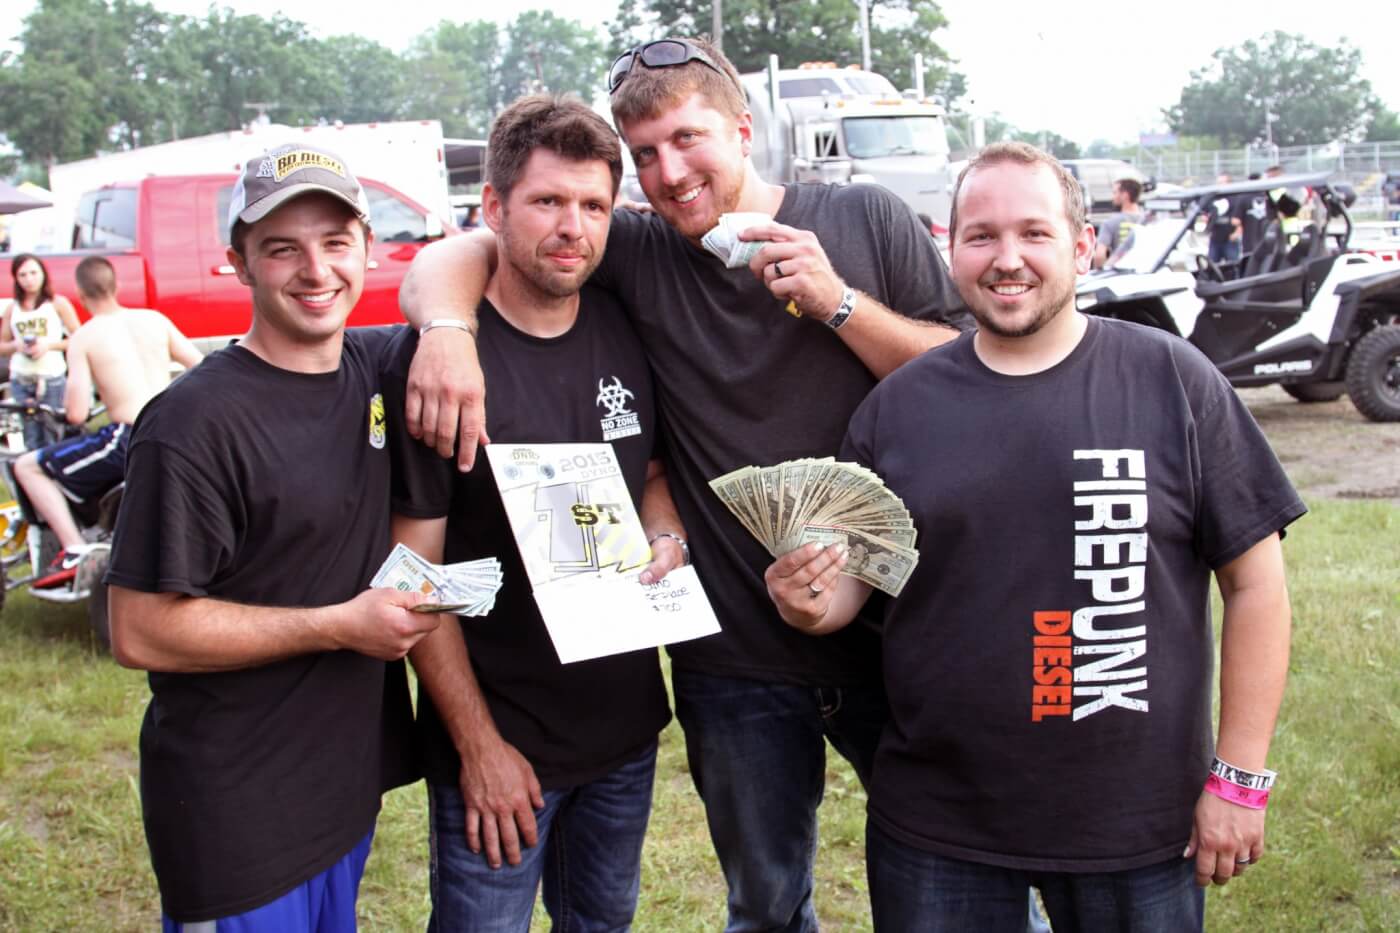 From left to right: Derek Rose, Dmitri Millard, Ryan Milliken and Lavon Miller. The gents gather together to settle a bet that Millard would not win the dyno competition. As you can see, Rose, Milliken and Miller have to back up their bet and Millard went home with an extra $3,000 cash in his pocket.